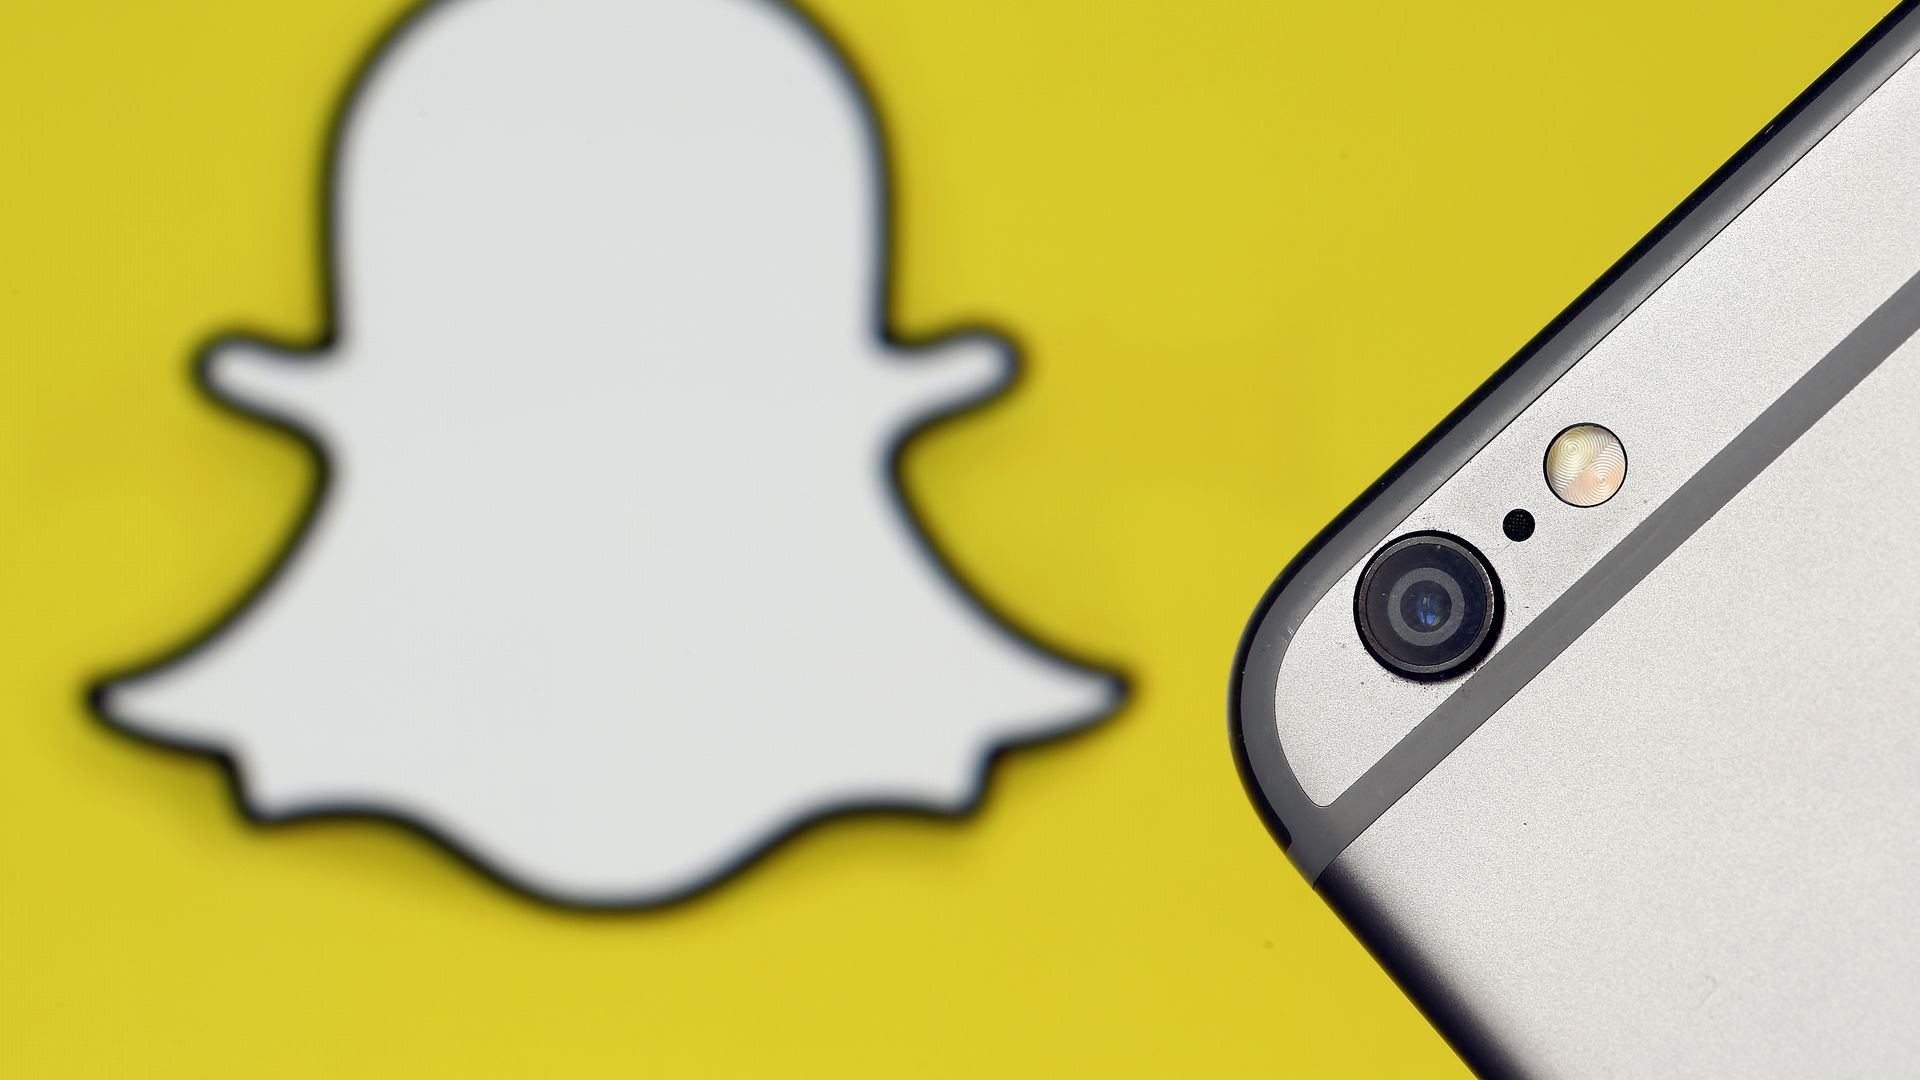 iPhone camera in front of the Snapchat logo